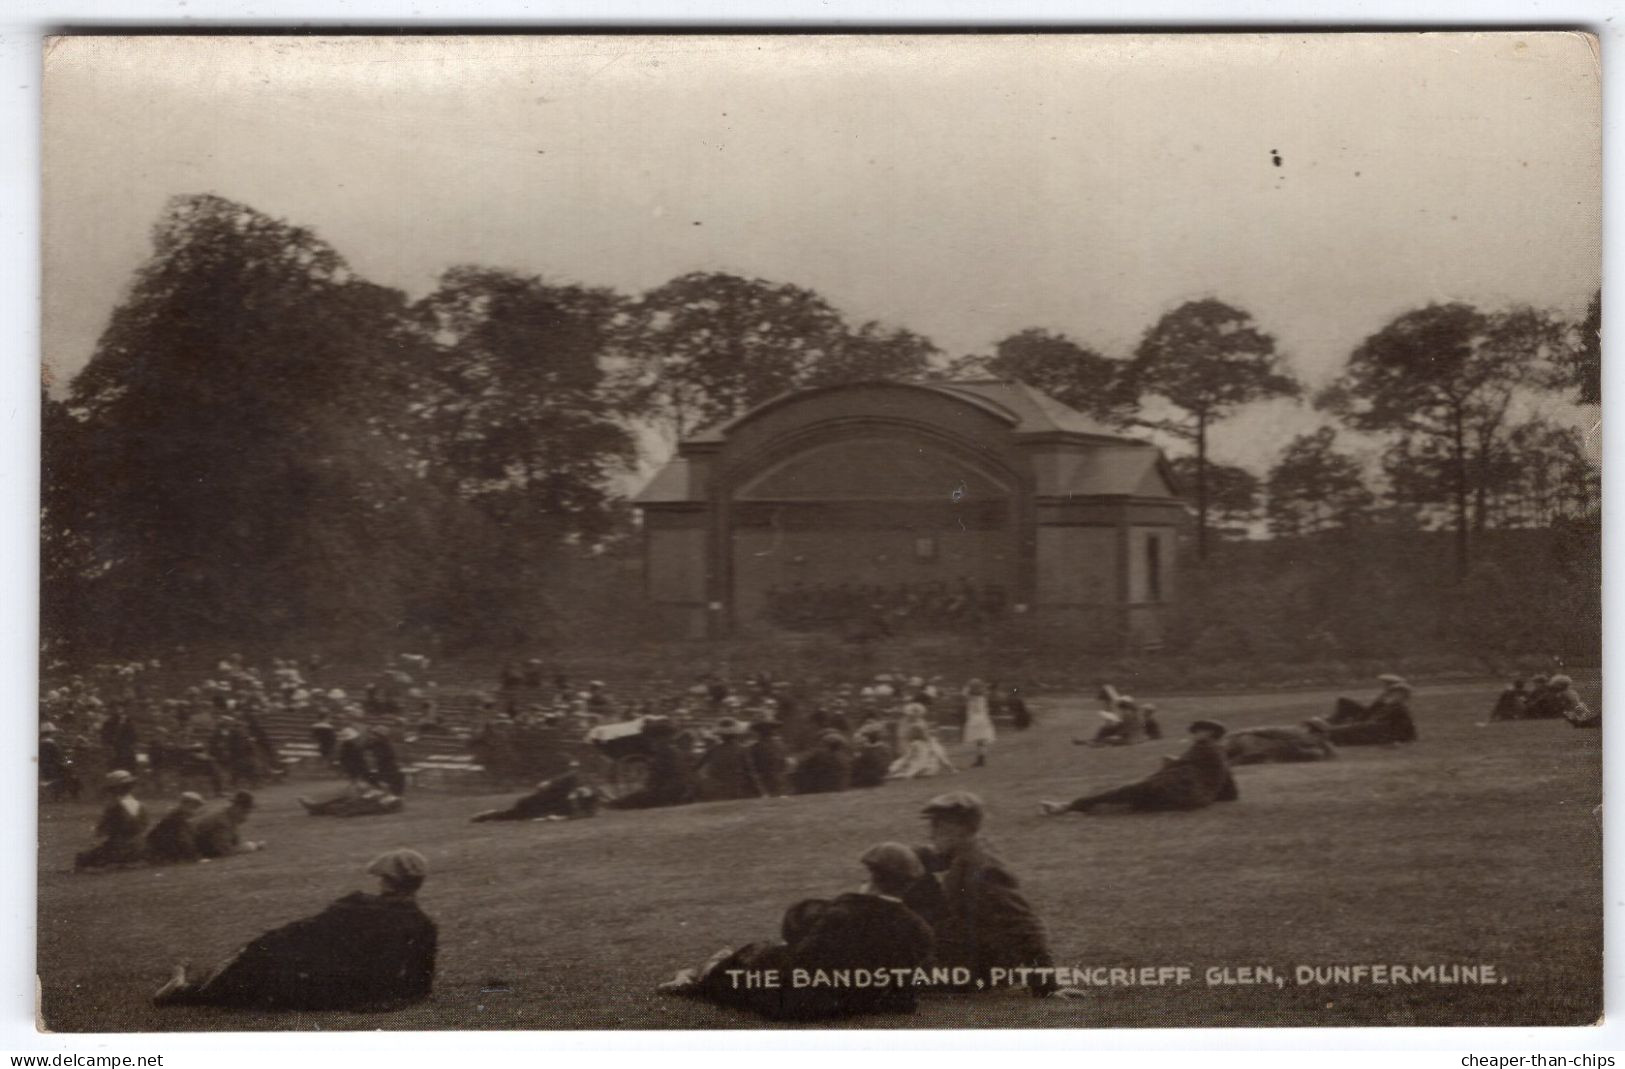 DUNFERMLINE- The Bandstand, Pittencrieff Glen - Photographic Card - Fife